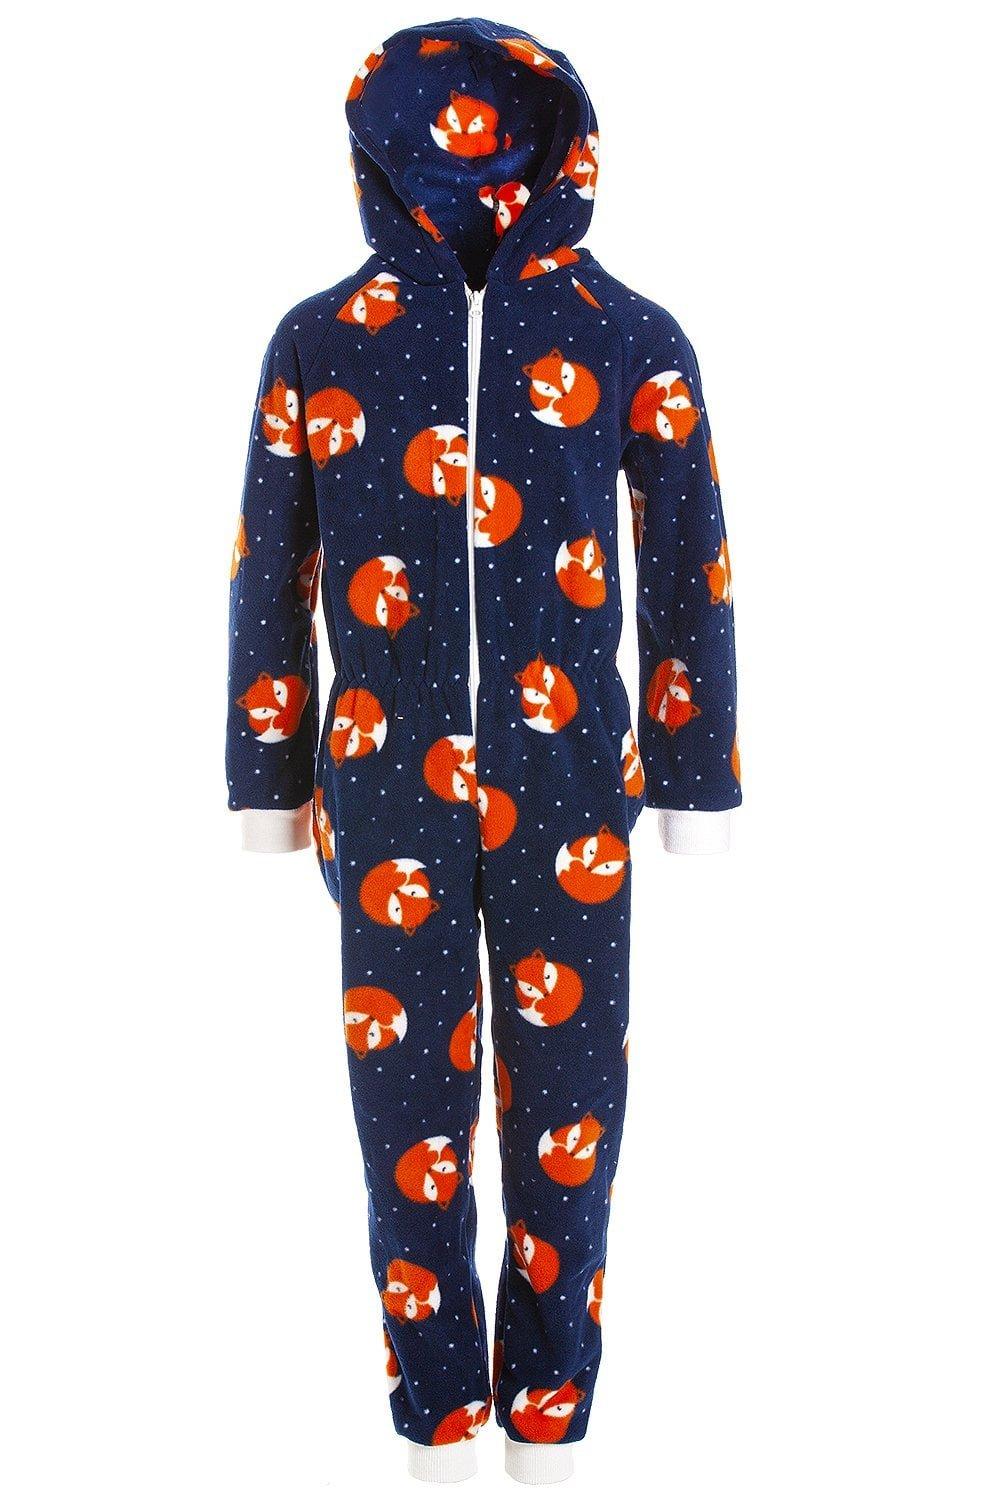 Supersoft Fox Animal Print Hooded All In One Onesie